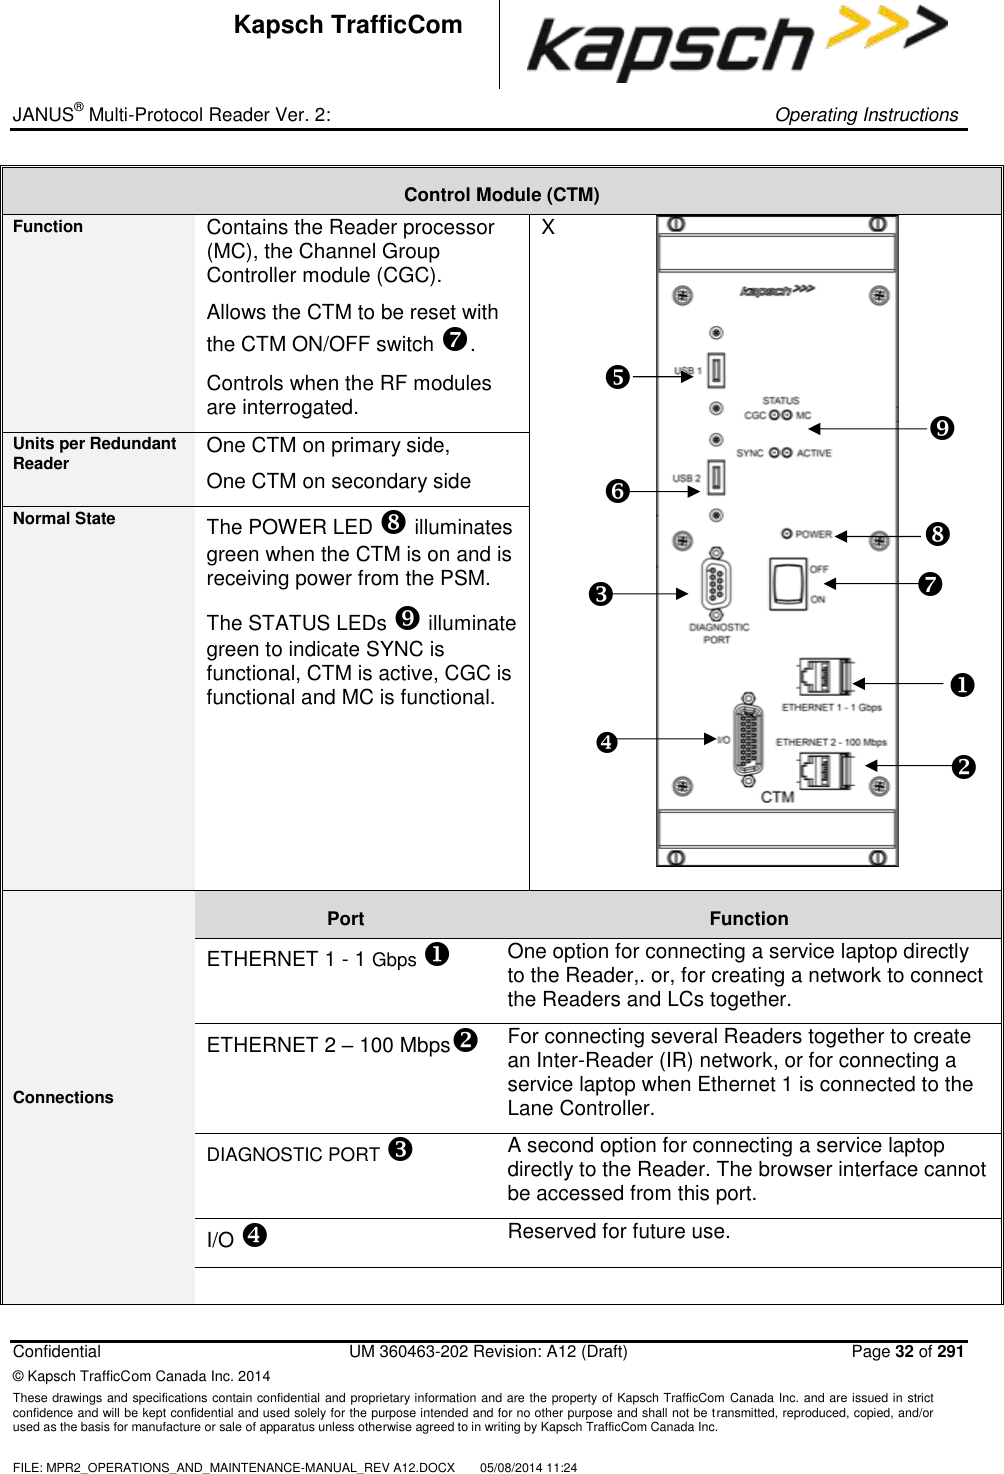 _ JANUS® Multi-Protocol Reader Ver. 2:     Operating Instructions  Confidential  UM 360463-202 Revision: A12 (Draft)   Page 32 of 291 © Kapsch TrafficCom Canada Inc. 2014 These drawings and specifications contain confidential and proprietary information and are the property of Kapsch TrafficCom  Canada Inc. and are issued in strict confidence and will be kept confidential and used solely for the purpose intended and for no other purpose and shall not be transmitted, reproduced, copied, and/or used as the basis for manufacture or sale of apparatus unless otherwise agreed to in writing by Kapsch TrafficCom Canada Inc.  FILE: MPR2_OPERATIONS_AND_MAINTENANCE-MANUAL_REV A12.DOCX  05/08/2014 11:24  Kapsch TrafficCom Control Module (CTM) Function Contains the Reader processor (MC), the Channel Group Controller module (CGC). Allows the CTM to be reset with the CTM ON/OFF switch .  Controls when the RF modules are interrogated. X   Units per Redundant Reader One CTM on primary side, One CTM on secondary side Normal State The POWER LED  illuminates green when the CTM is on and is receiving power from the PSM.  The STATUS LEDs  illuminate green to indicate SYNC is functional, CTM is active, CGC is functional and MC is functional.  Connections Port  Function ETHERNET 1 - 1 Gbps  One option for connecting a service laptop directly to the Reader,. or, for creating a network to connect the Readers and LCs together. ETHERNET 2 – 100 Mbps For connecting several Readers together to create an Inter-Reader (IR) network, or for connecting a service laptop when Ethernet 1 is connected to the Lane Controller.  DIAGNOSTIC PORT  A second option for connecting a service laptop directly to the Reader. The browser interface cannot be accessed from this port. I/O  Reserved for future use.                     